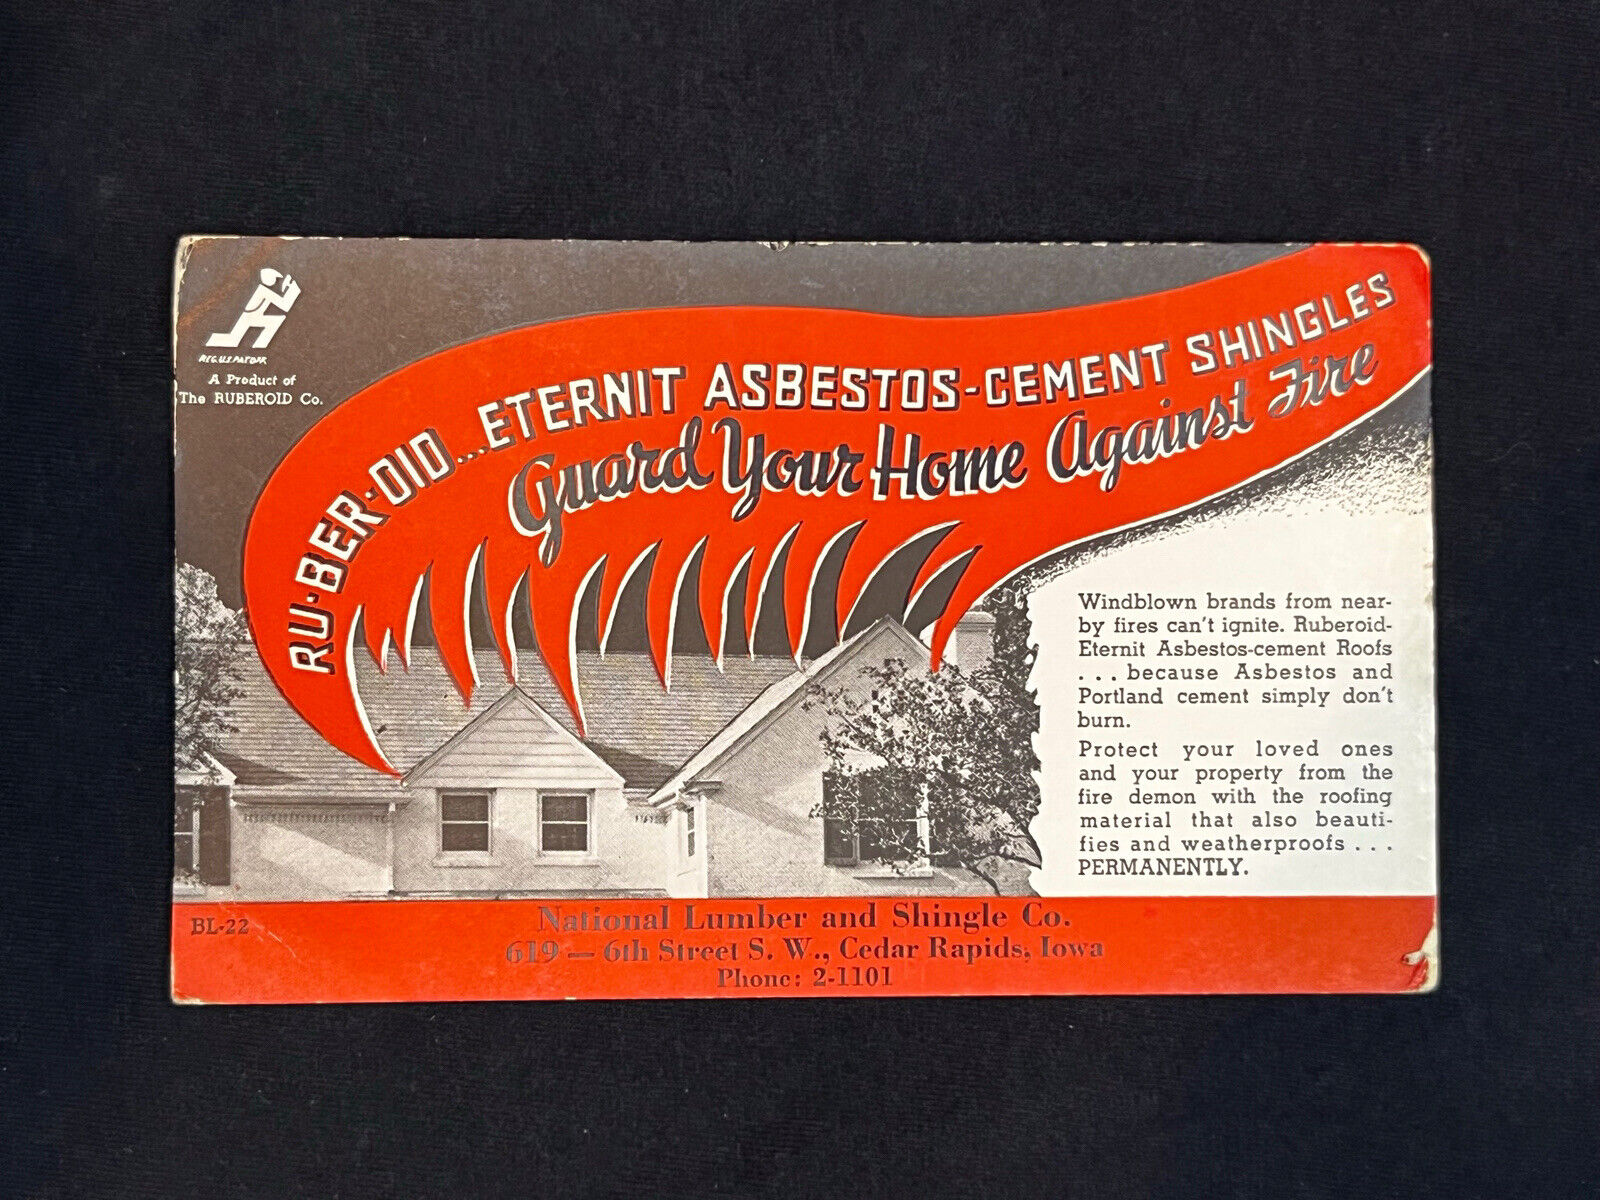 Ad Card: Rubberoid Eternit-Asbestos cement -Shingles. Product Of Rubberoid Co.